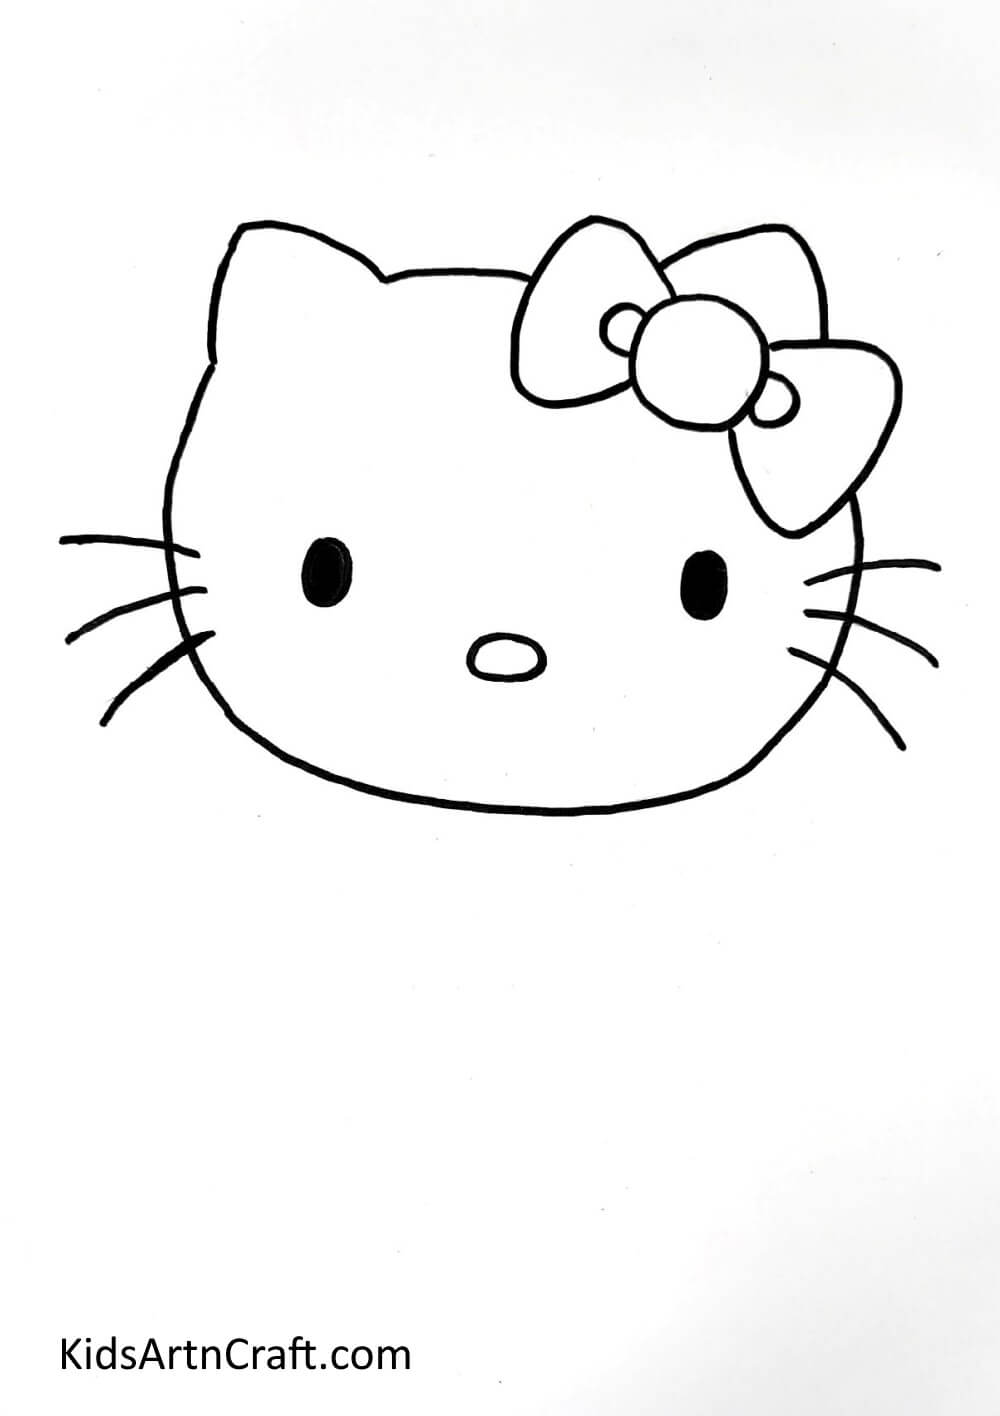 Drawing Face Details - Home-based kitty drawing task for kids.